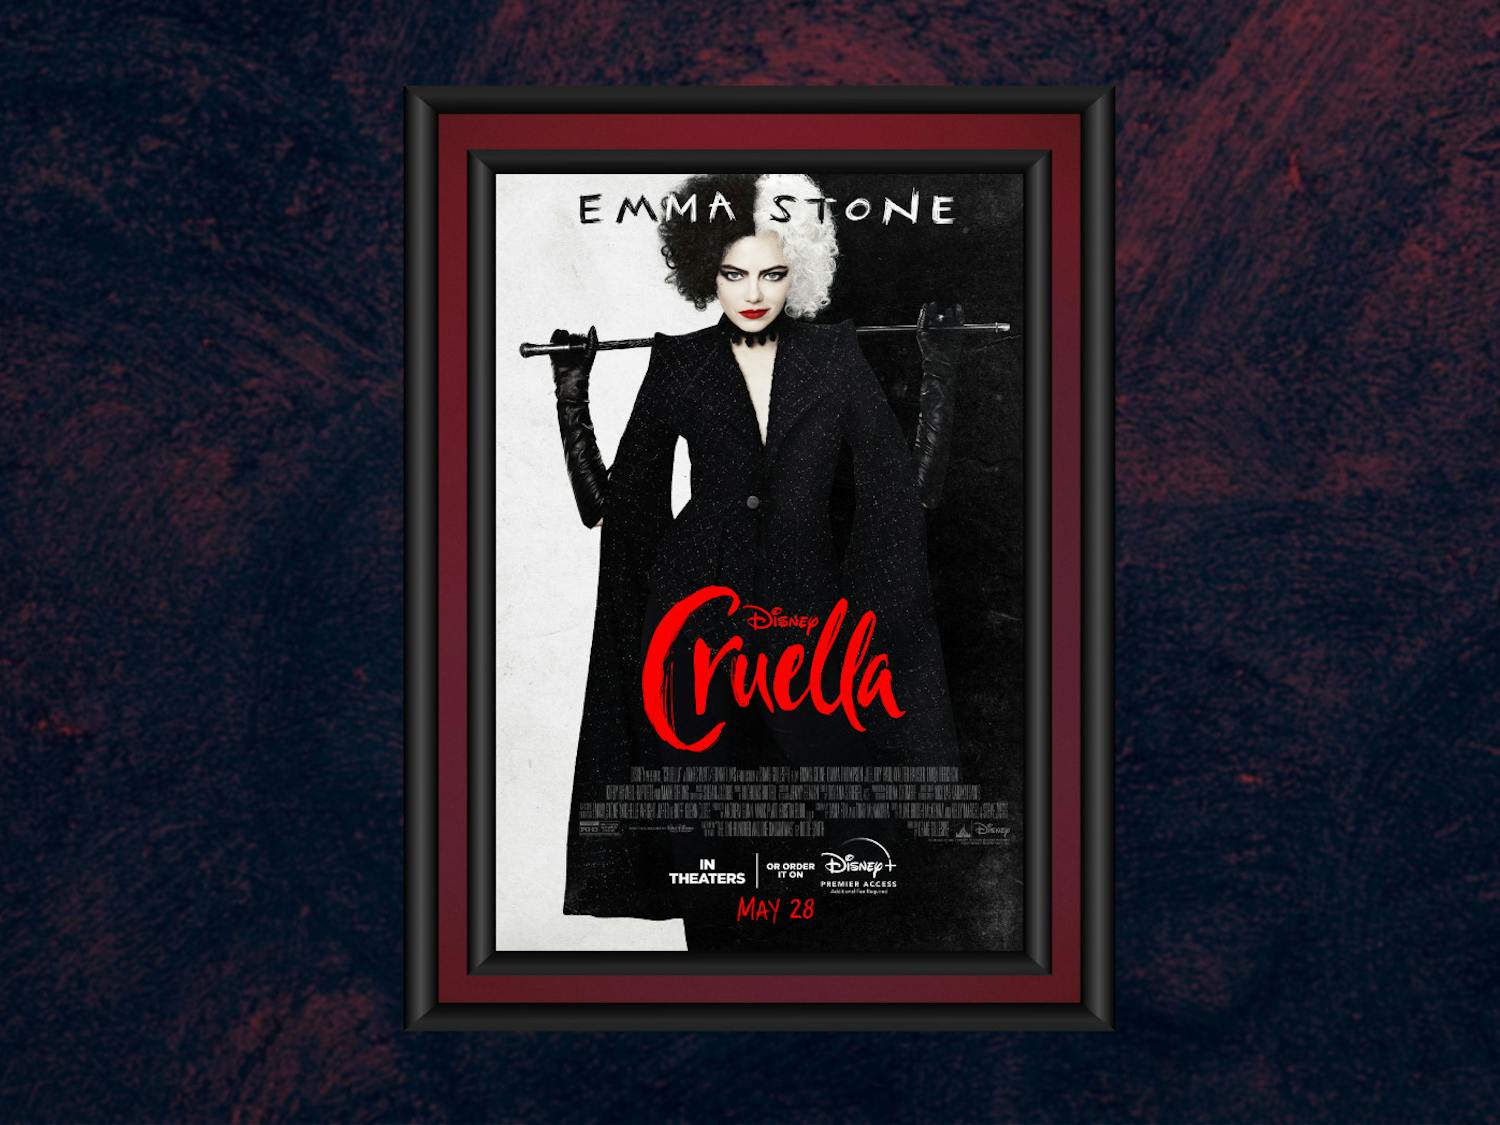 "Cruella" was released Memorial Day weekend and was the first major studio in-theater premiere since COVID-19. “Cruella” features the talented and witty two Emma’s. Emma Stone plays Estella Miller, a criminal yet aspiring raw-talented fashion designer; Emma Thompson plays Baroness, London’s most famous fashion designer. 


